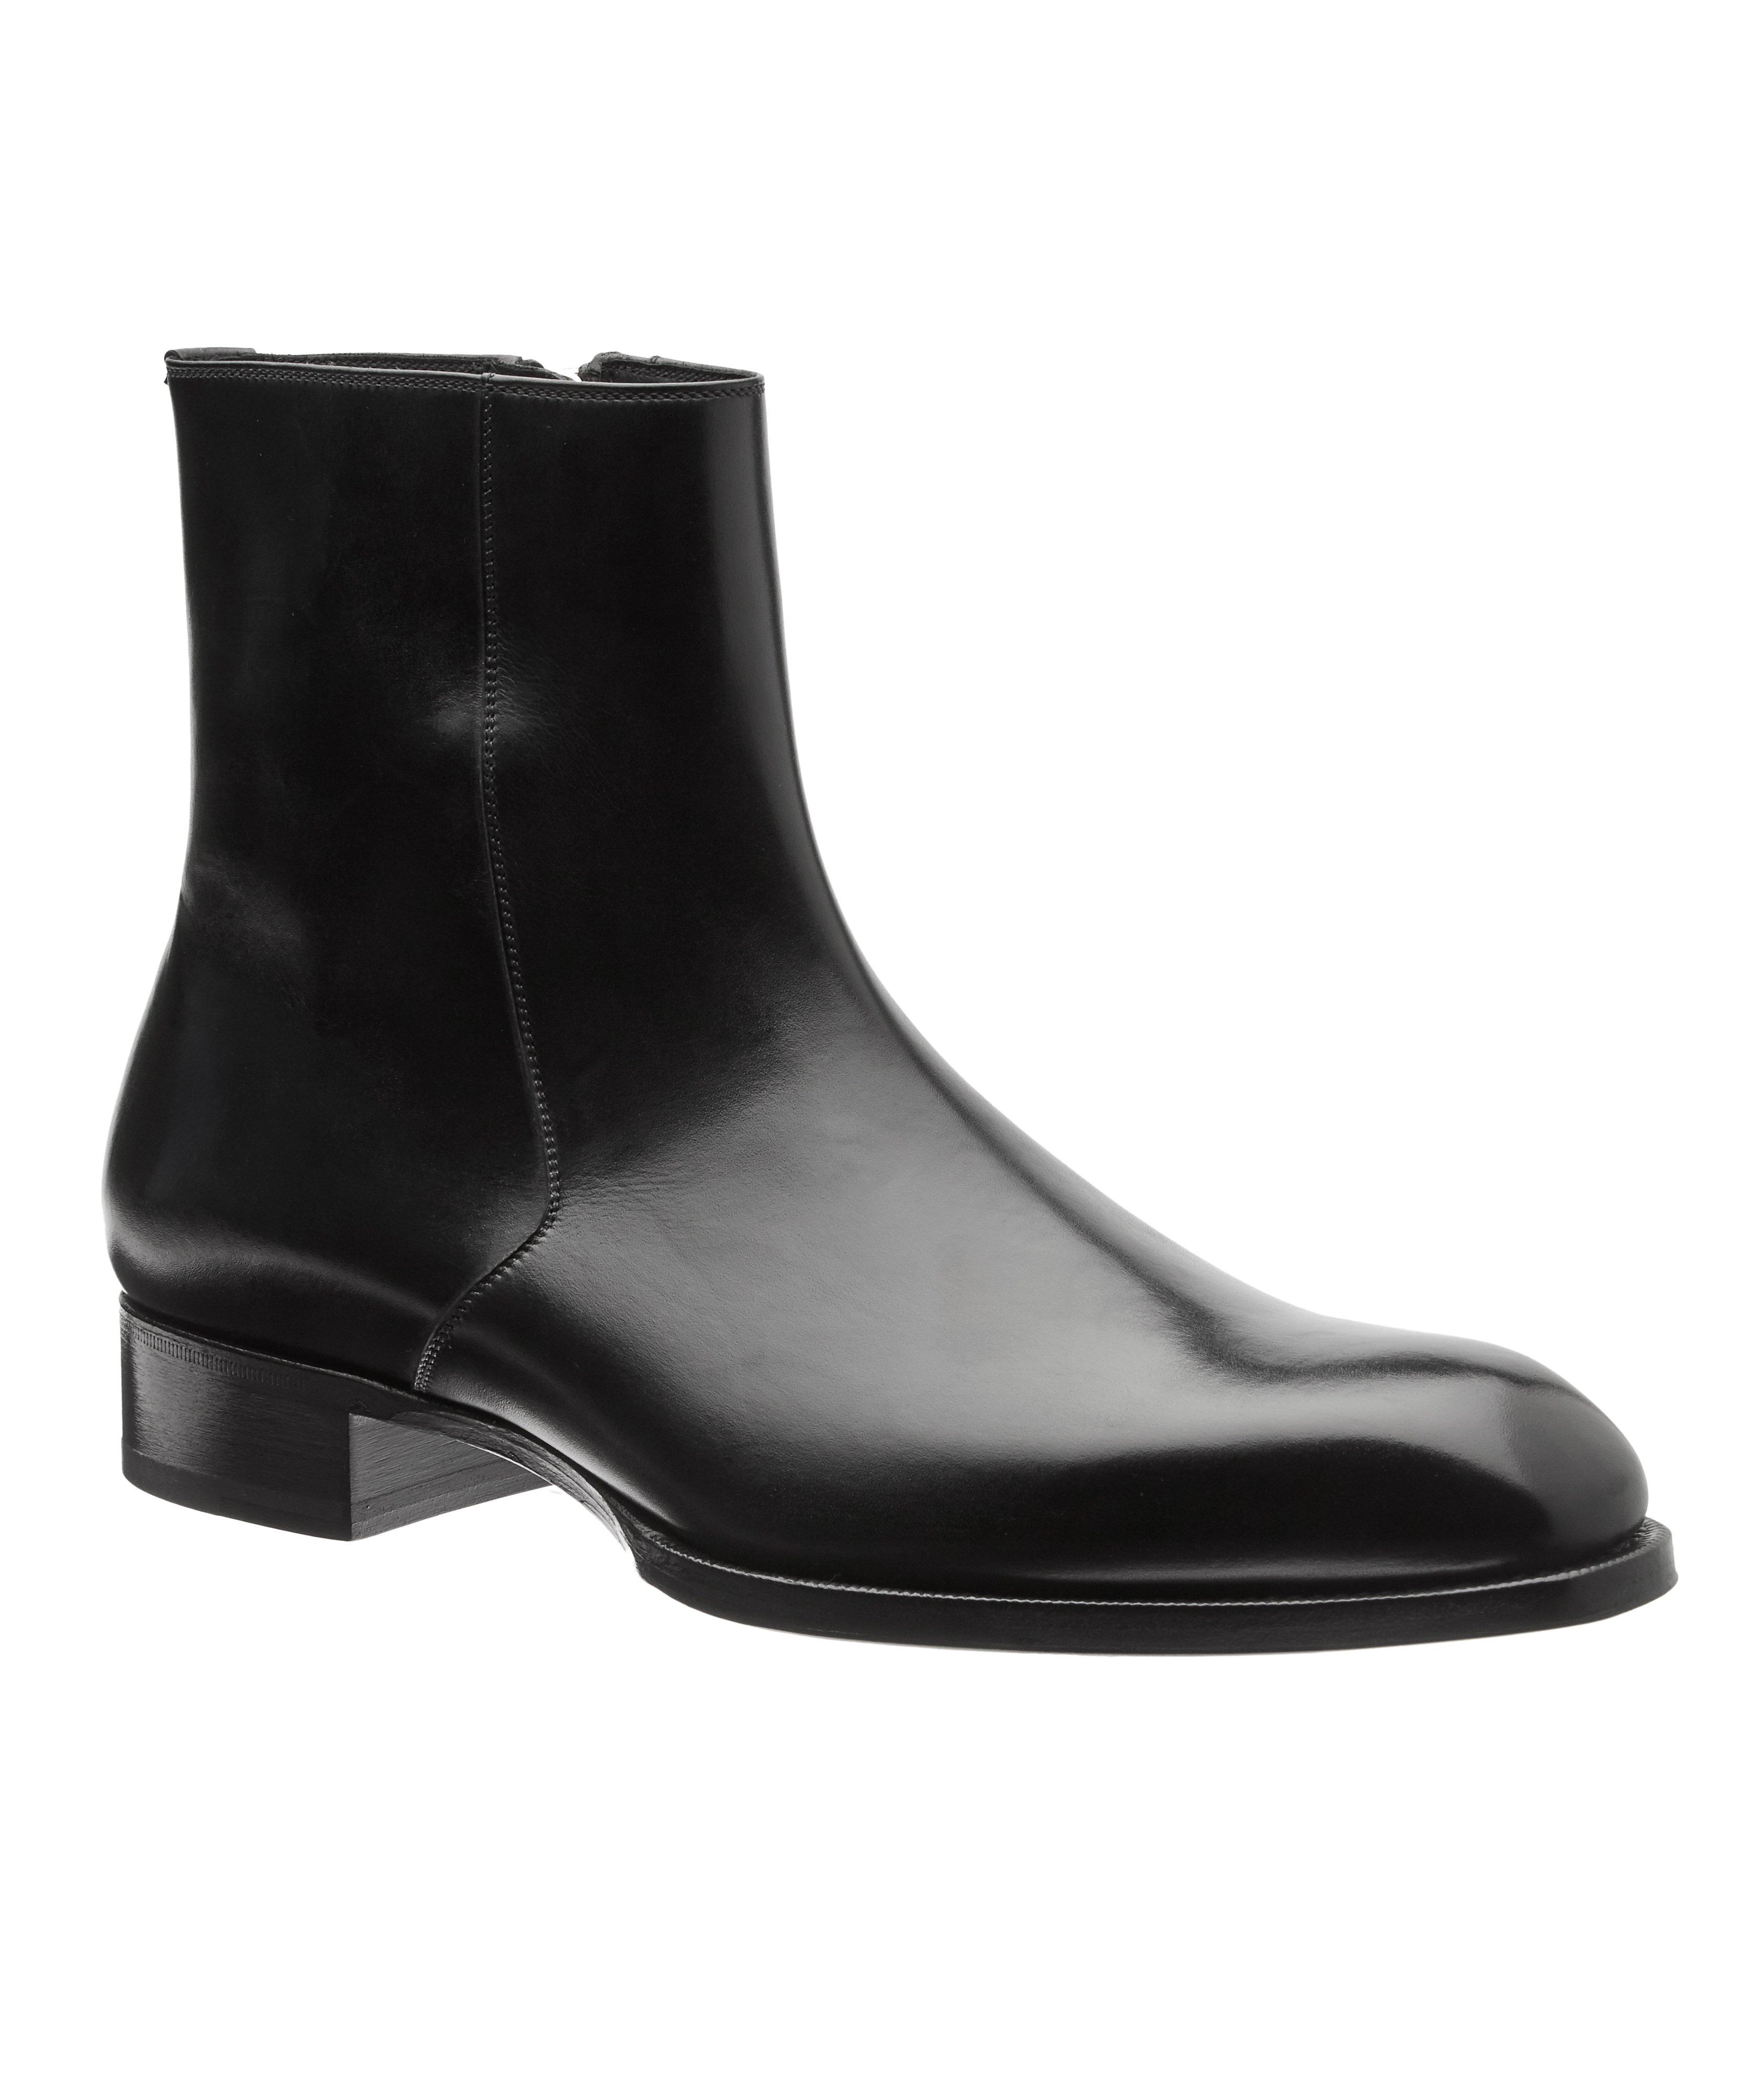 Elkan Ankle Boots image 0